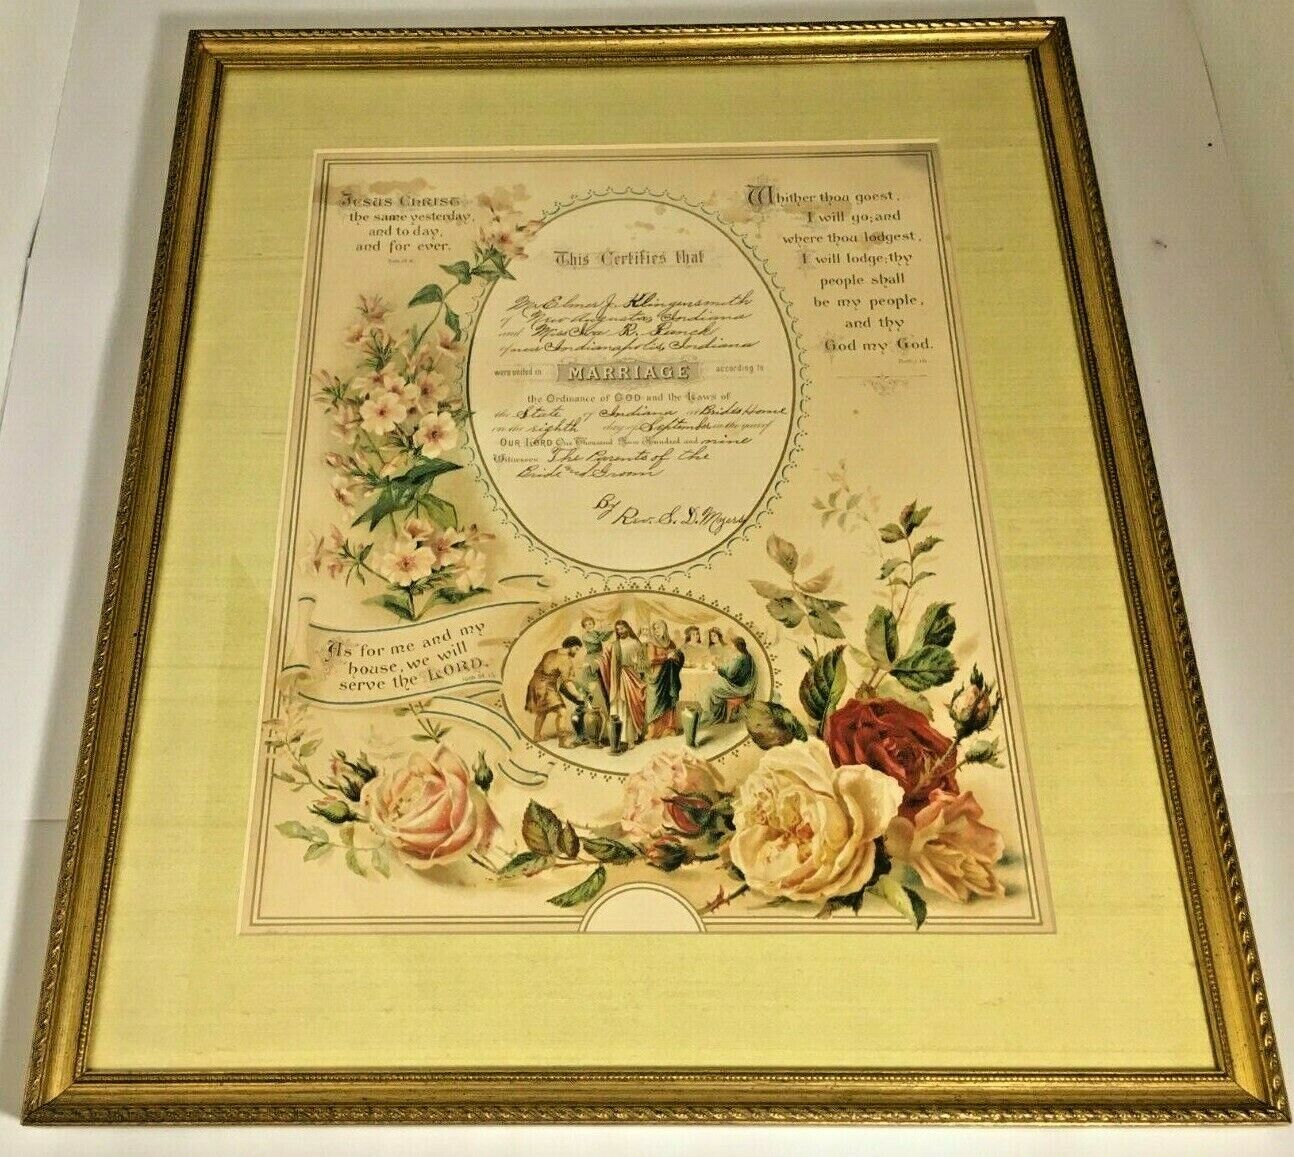 1909 Antique Indiana Framed Marriage Certificate 21x18x1